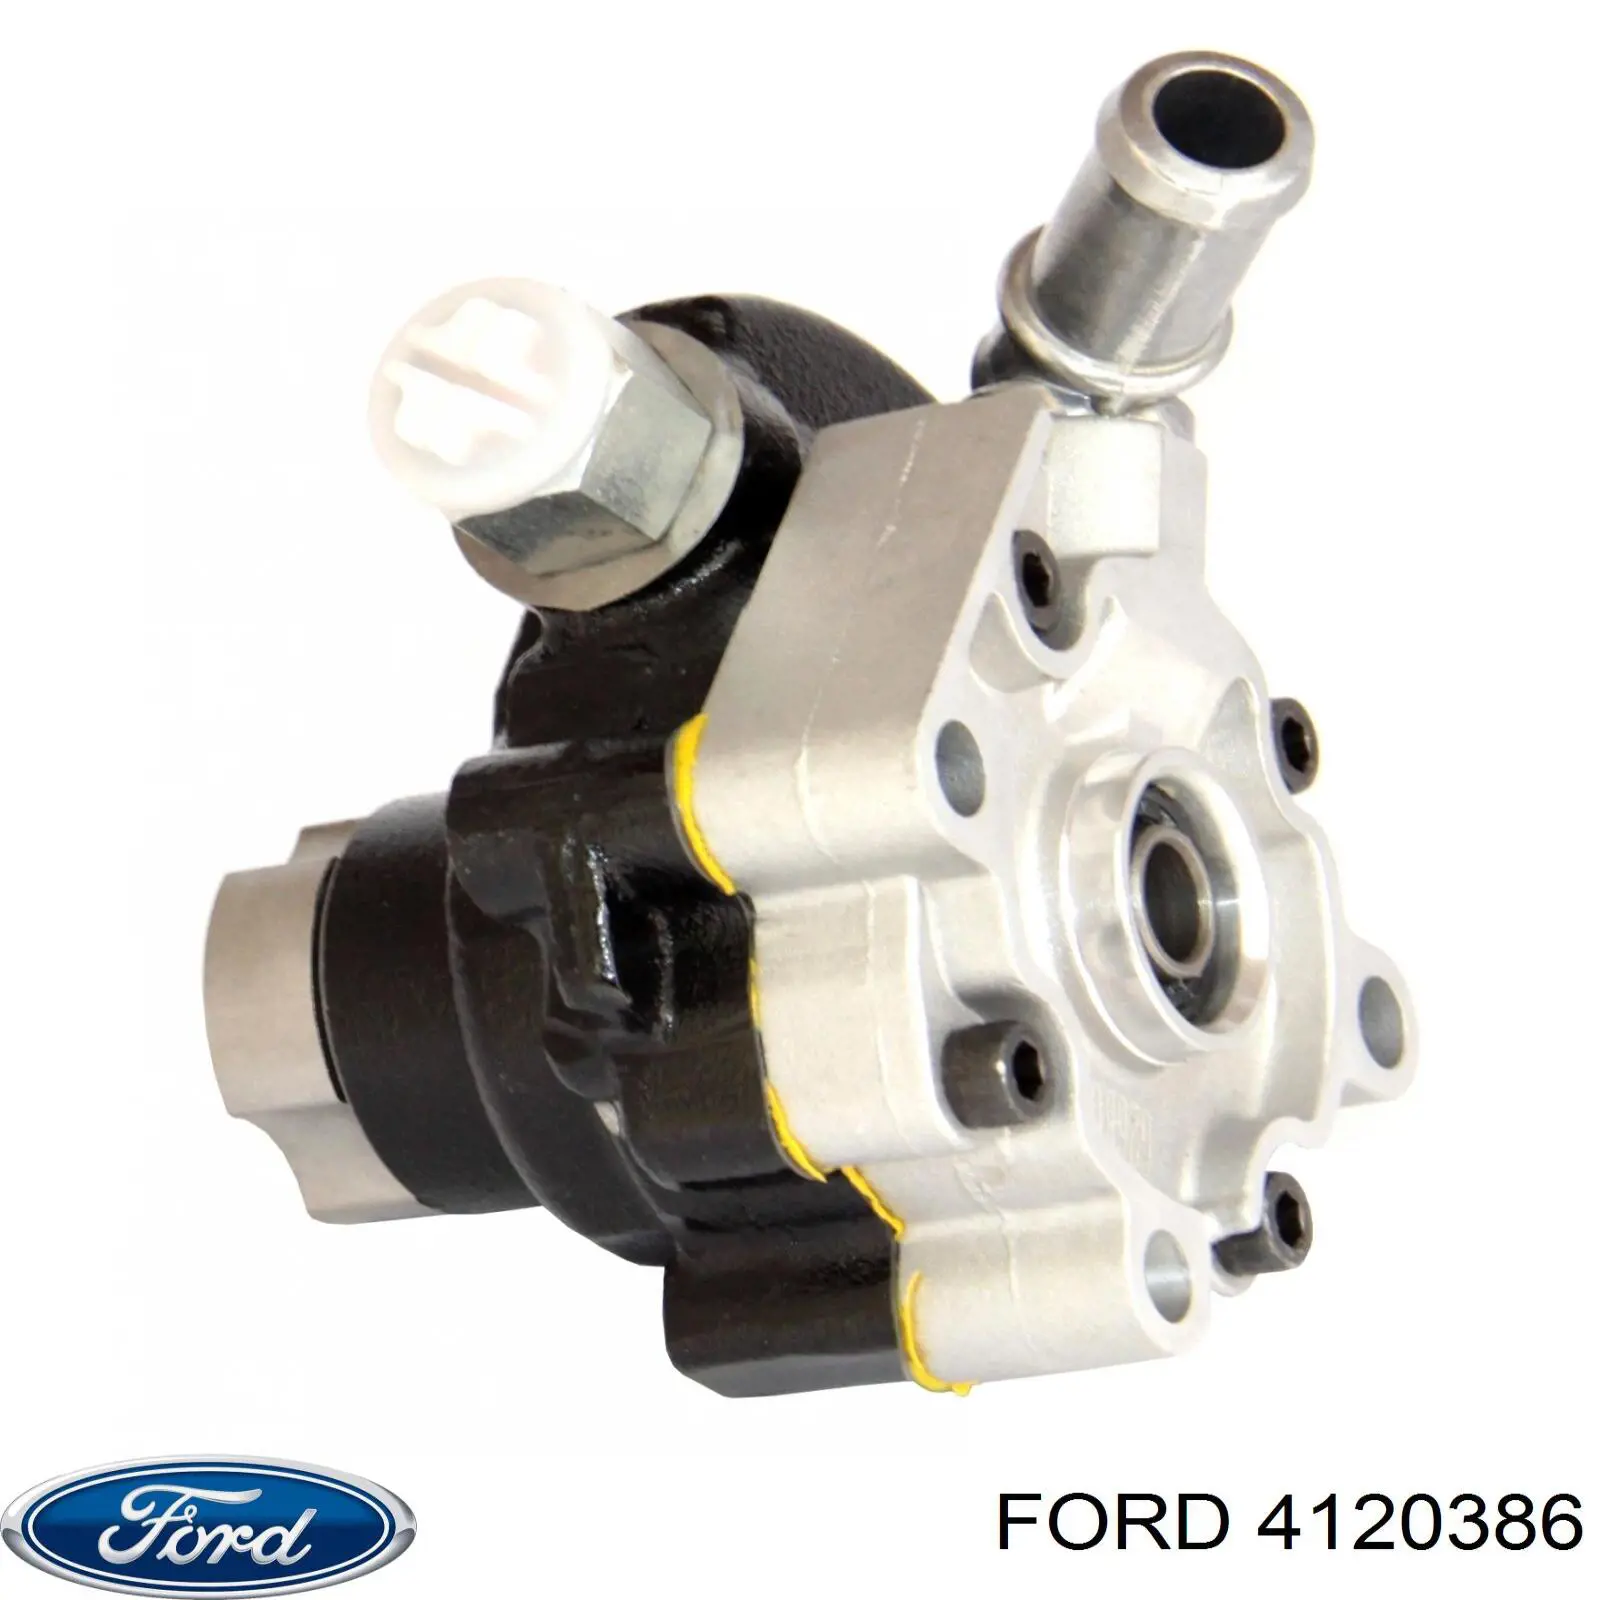 4120386 Ford насос гур